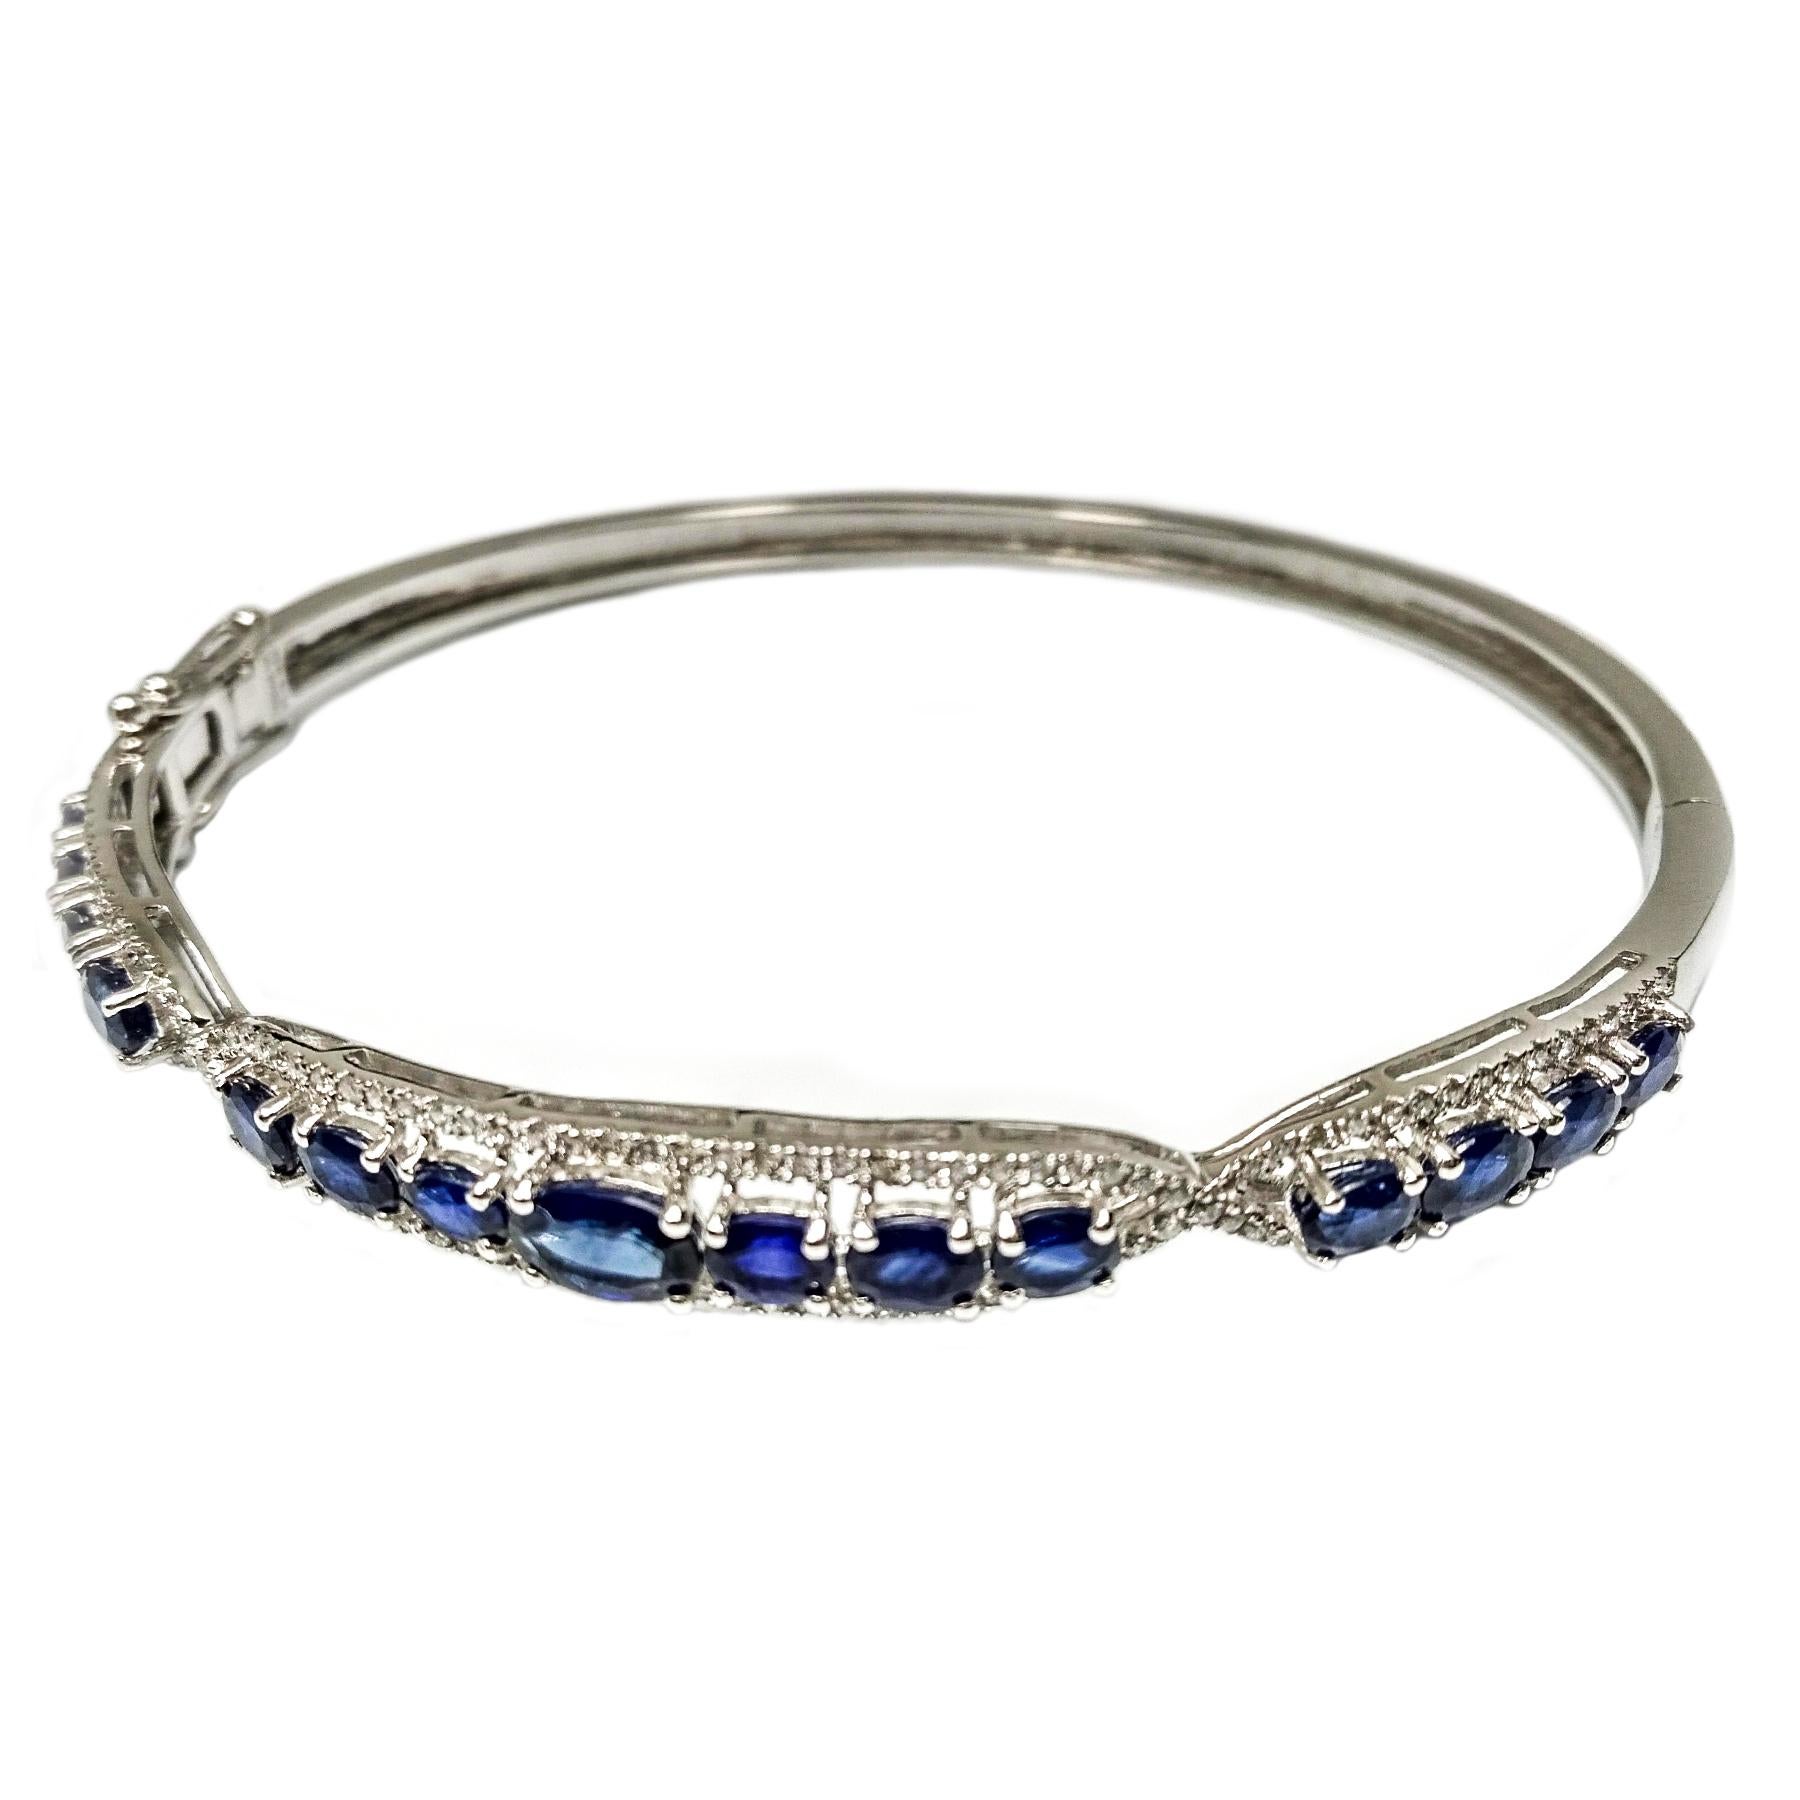 Elegant sapphire and diamond bangle. Contemporary handcrafted single row, dark blue, 3.74 carats, oval faceted sapphire mounted with head prongs. High polished bangle accented with round brilliant cut diamonds, set in 14 karat white gold, with